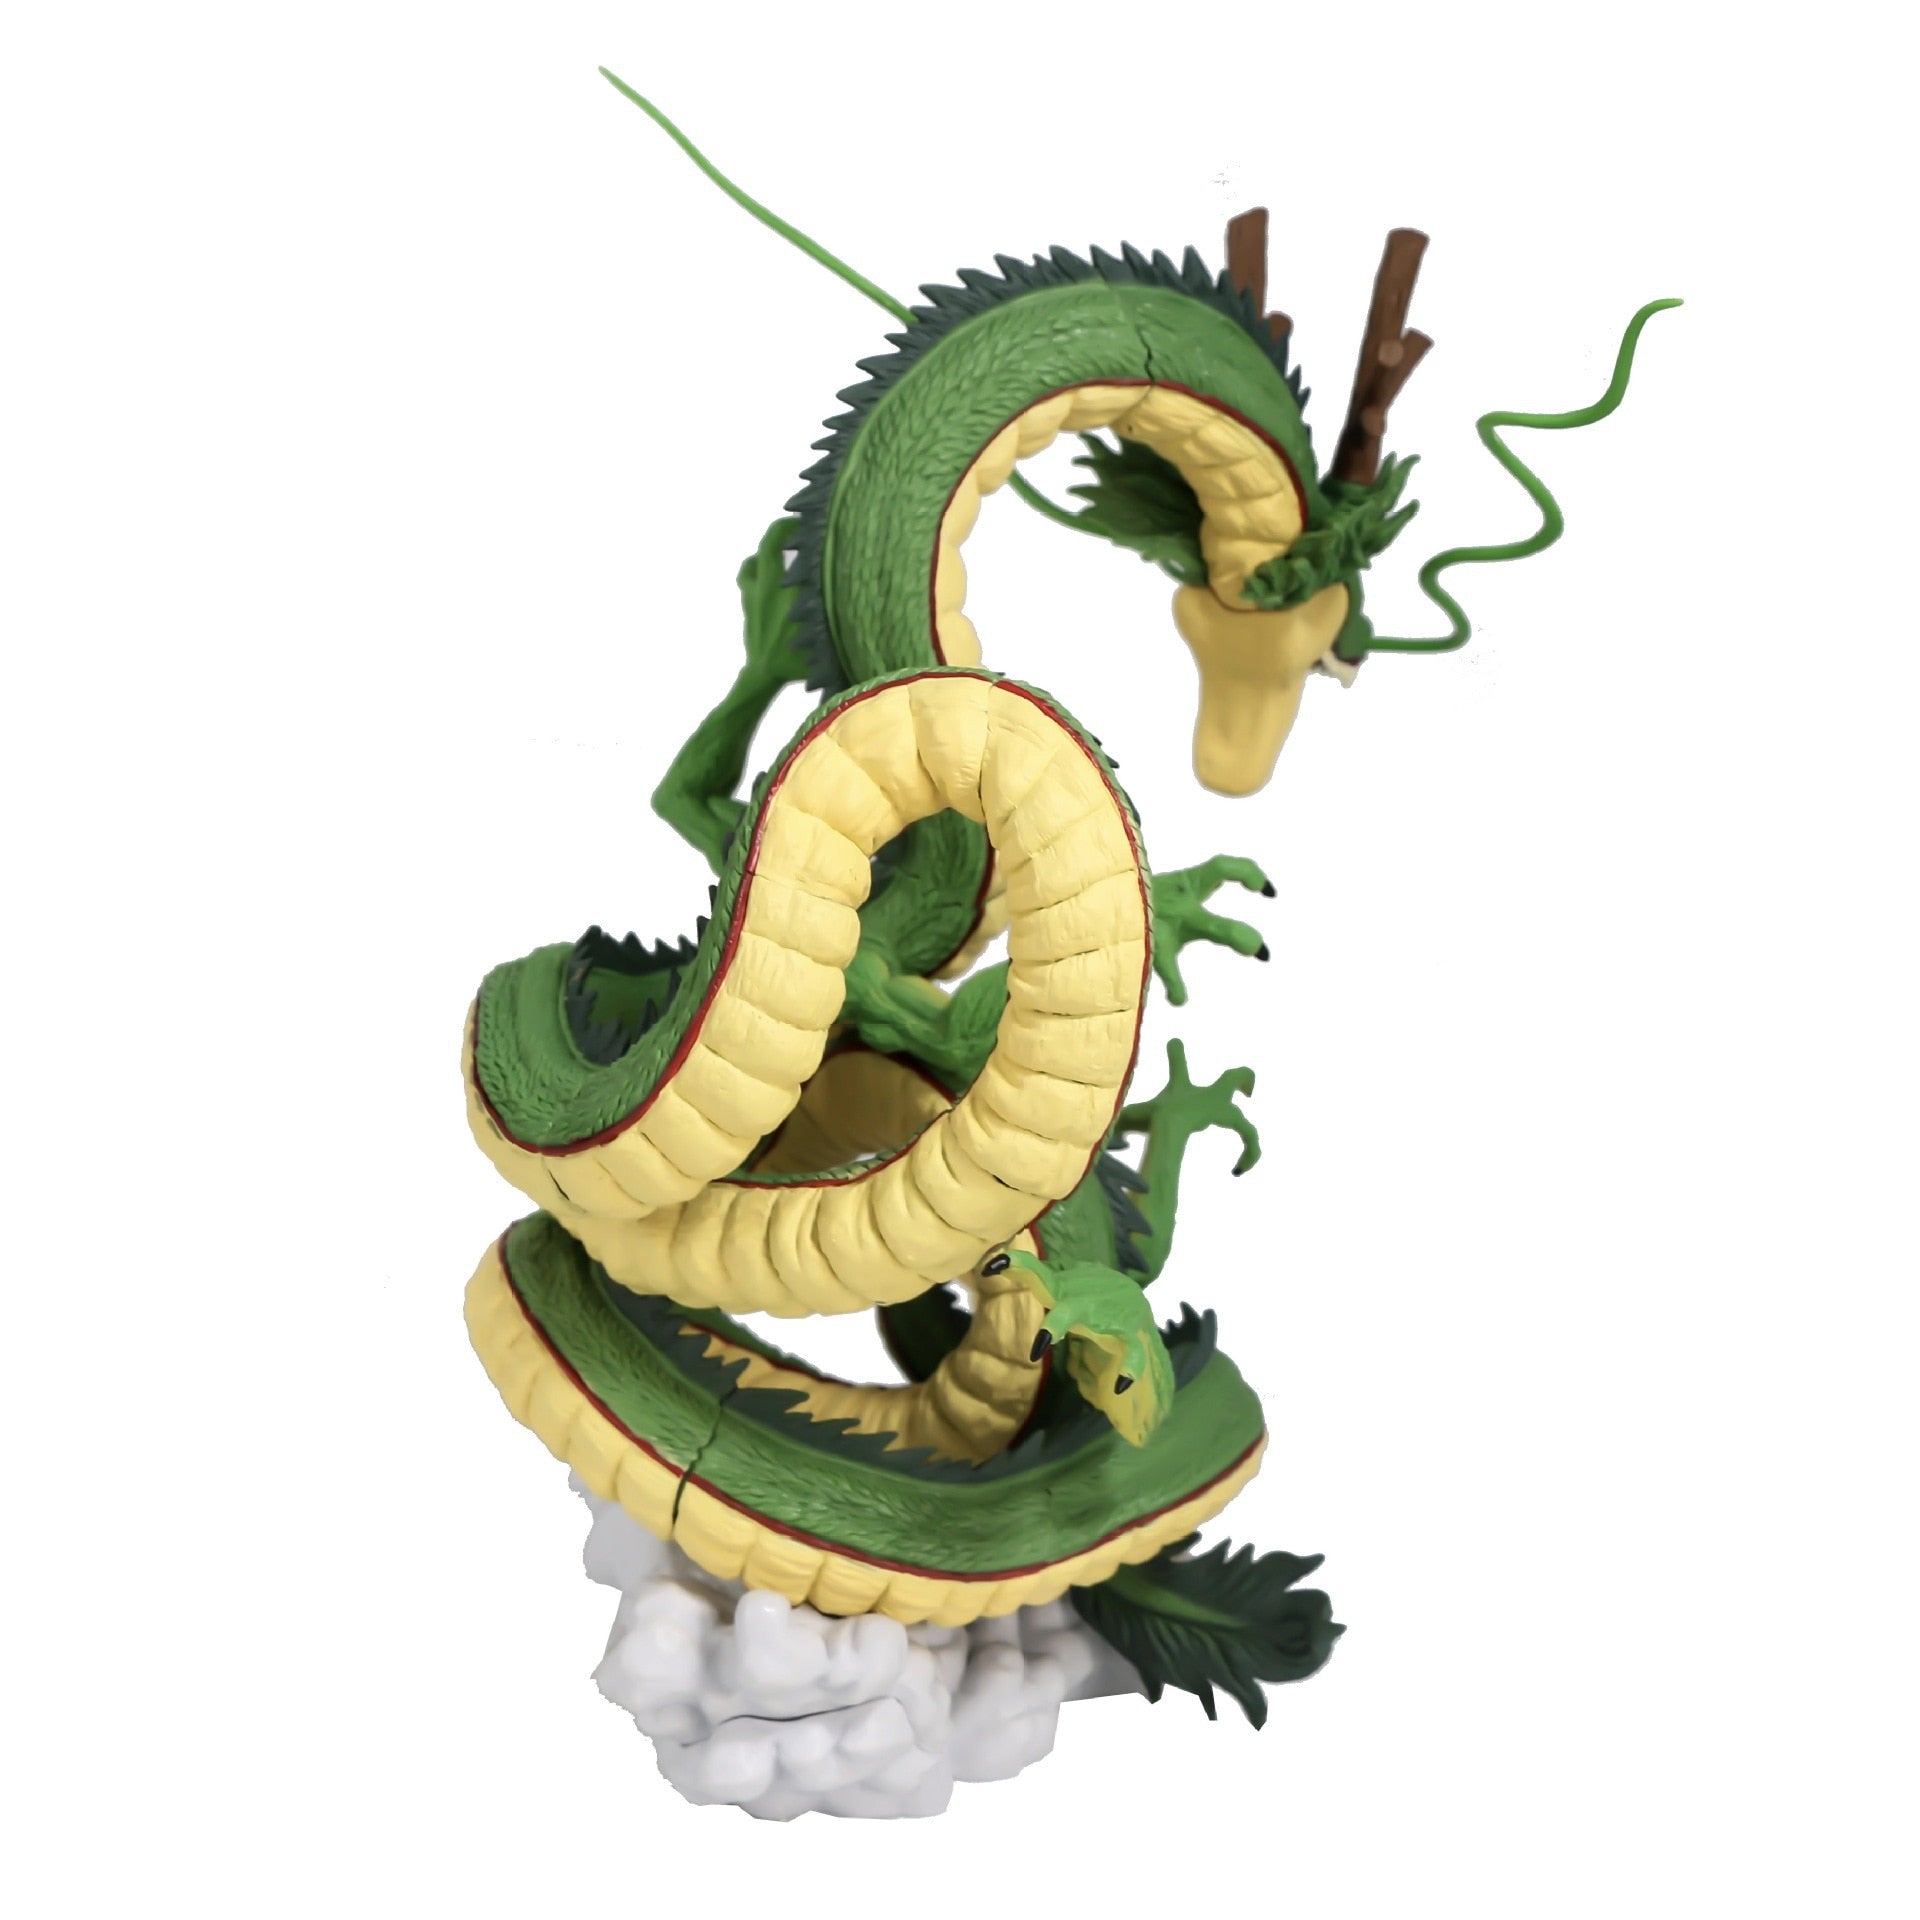 Ultimate Shenron Dragon Ball Z Red Action Figure